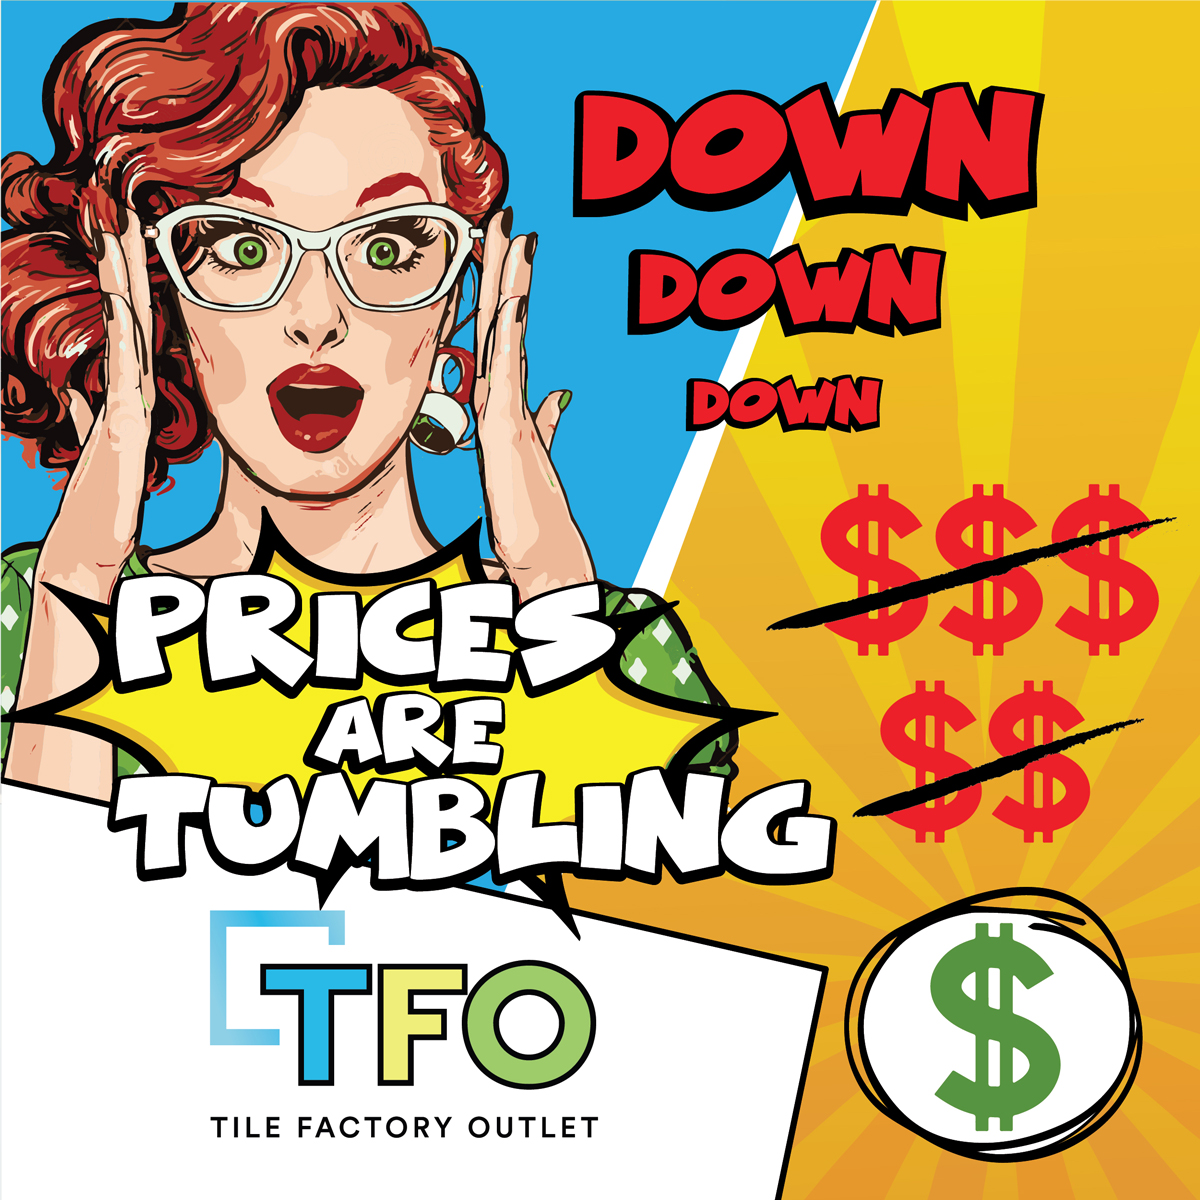 Floor Tiles Sydney – Buy From TFO and Save!